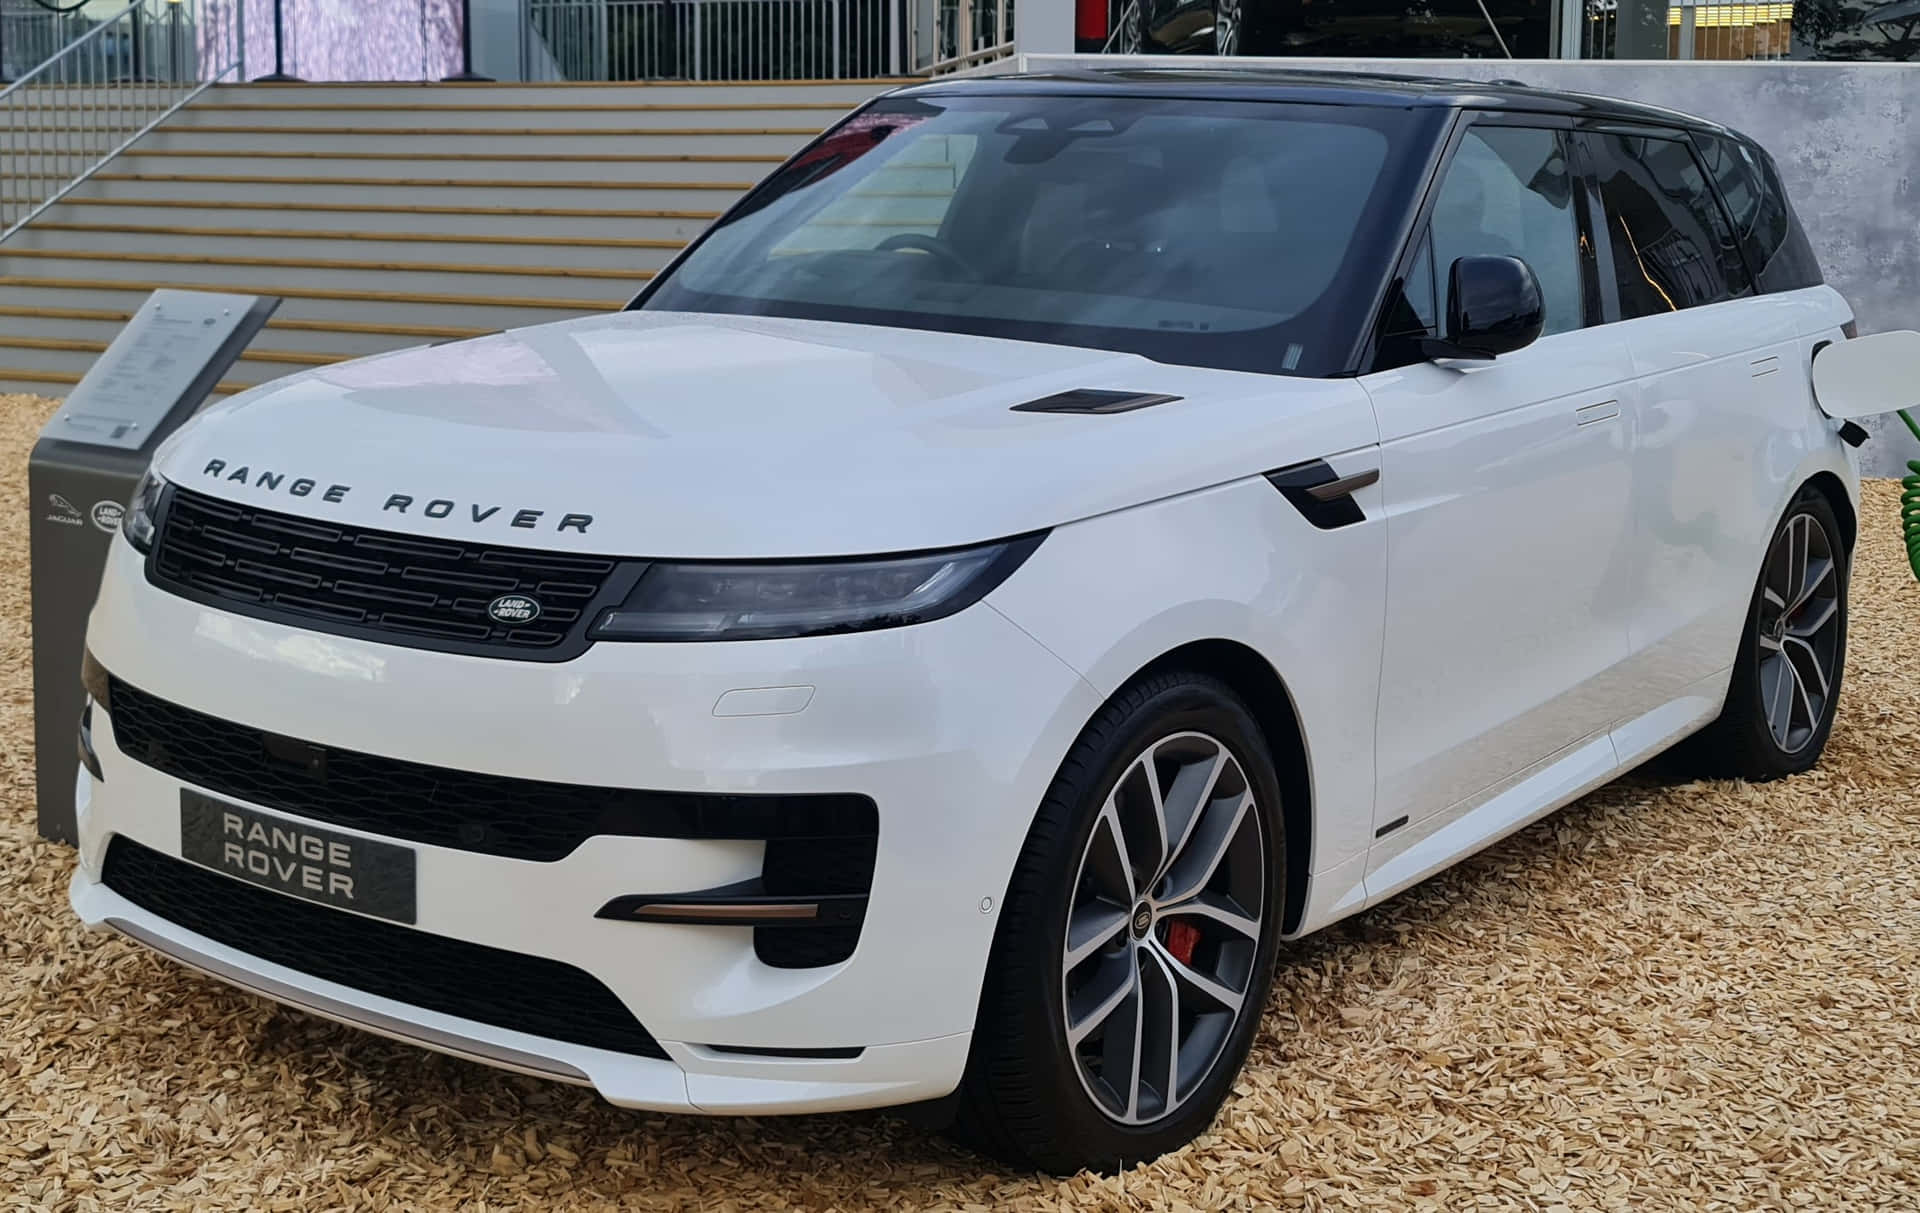 Journey in Style in a Range Rover